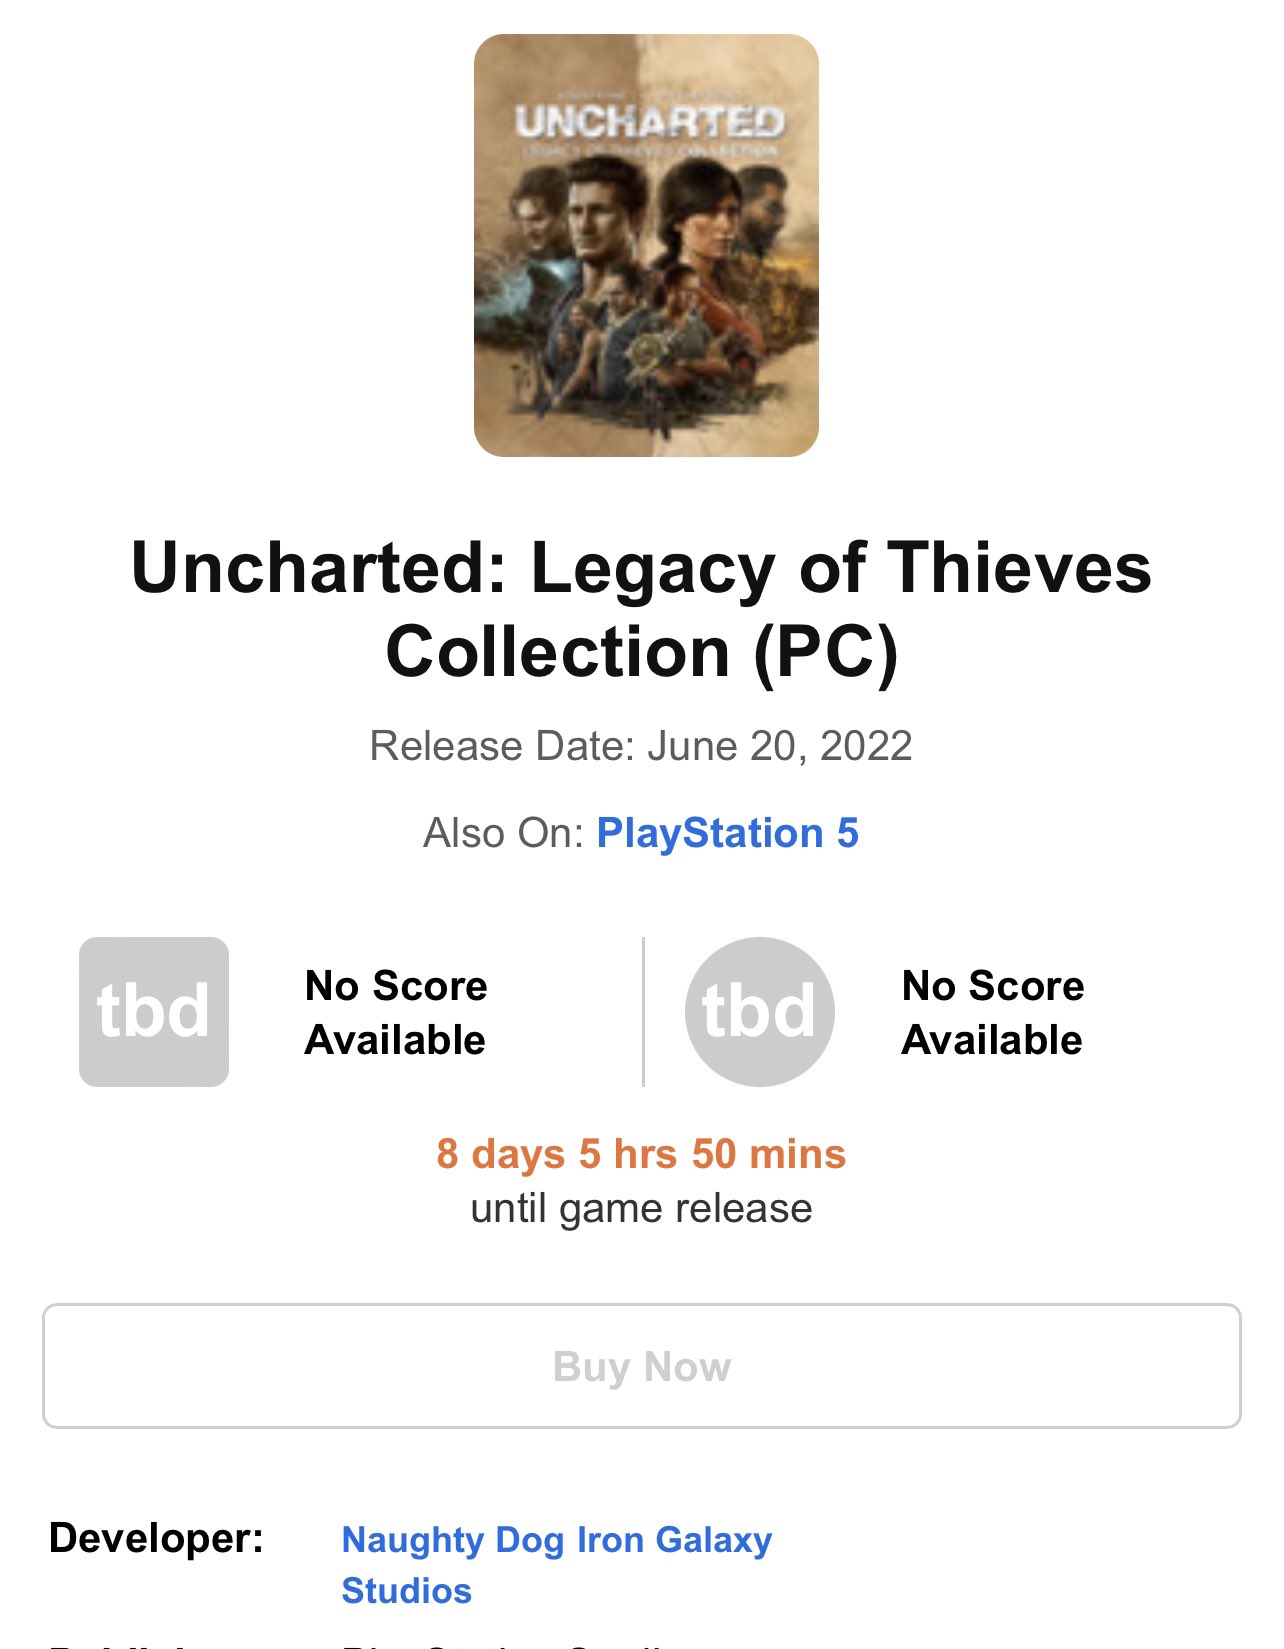 metacritic on X: Reviews of the PC version of Uncharted: Legacy